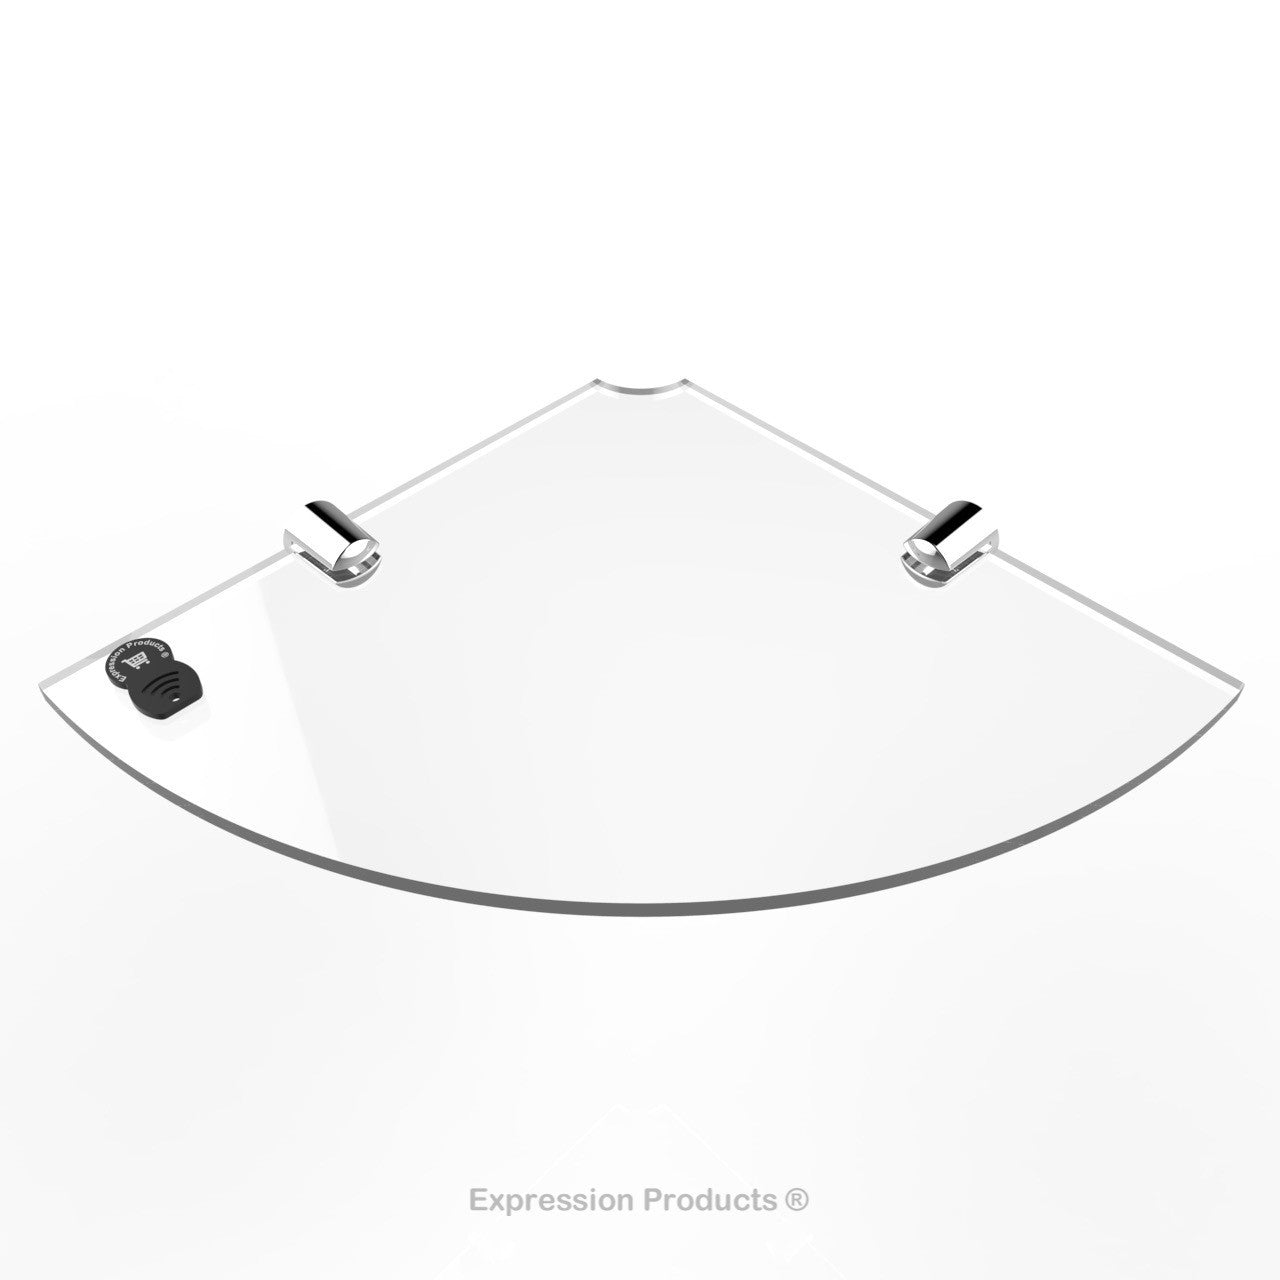 Corner Acrylic Shelf With Cable Feed Through - Style 001 - Expression Products Ltd